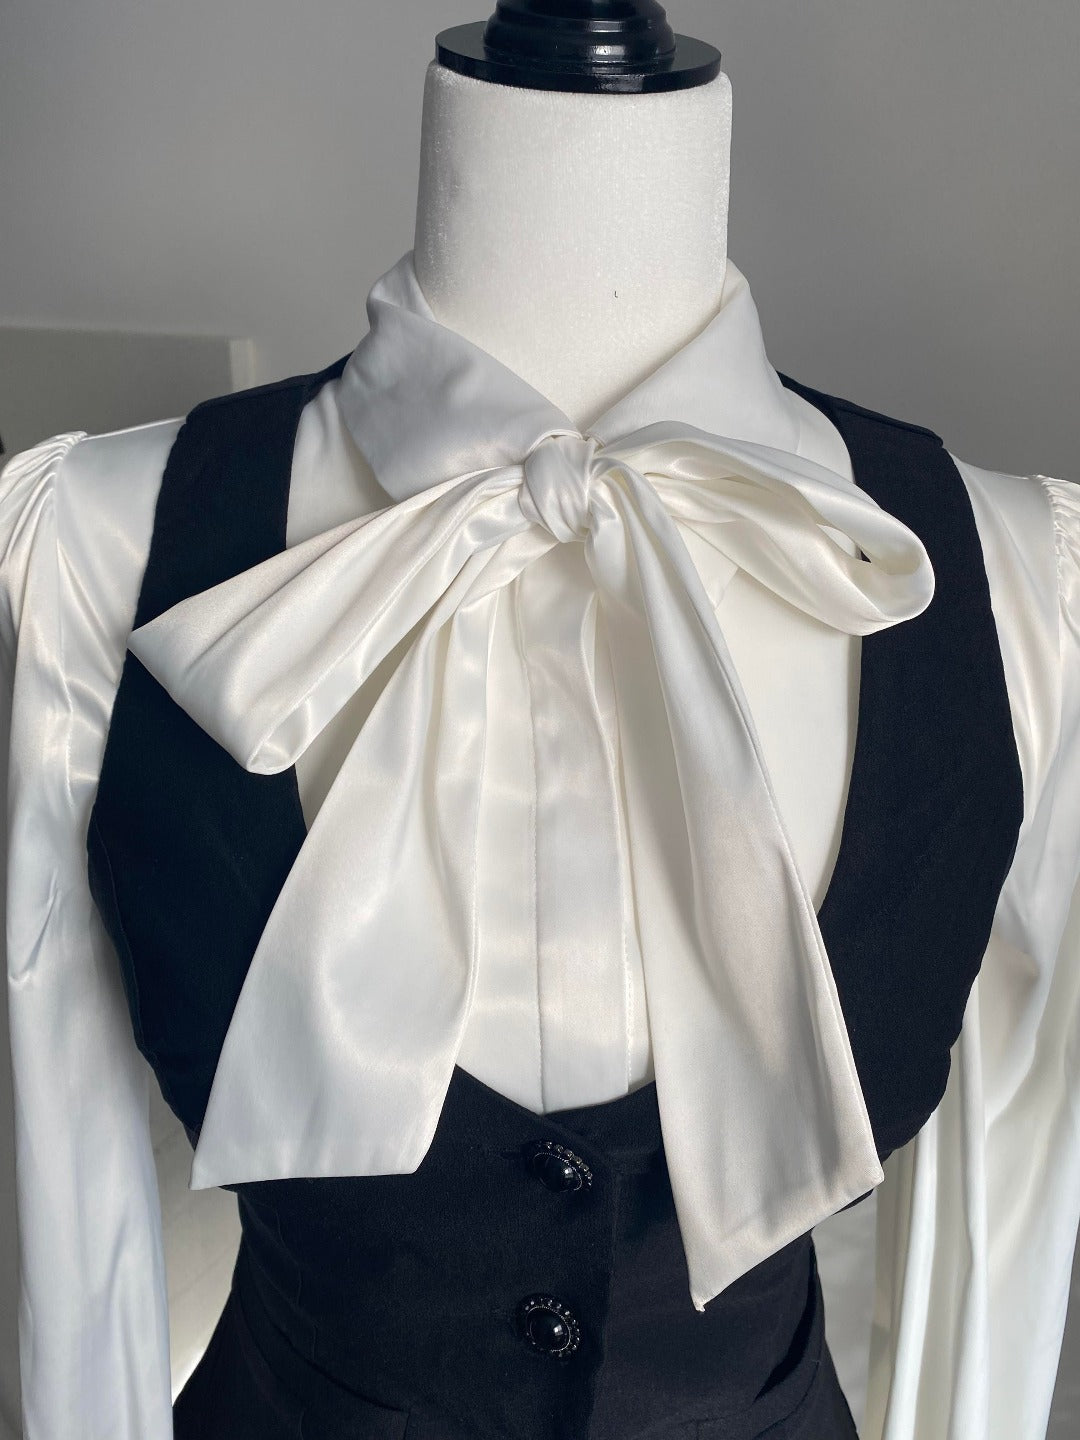 Ribbon details of the Angela Blouse in white with a black vest on top on a white bust mannequin against a white wall.